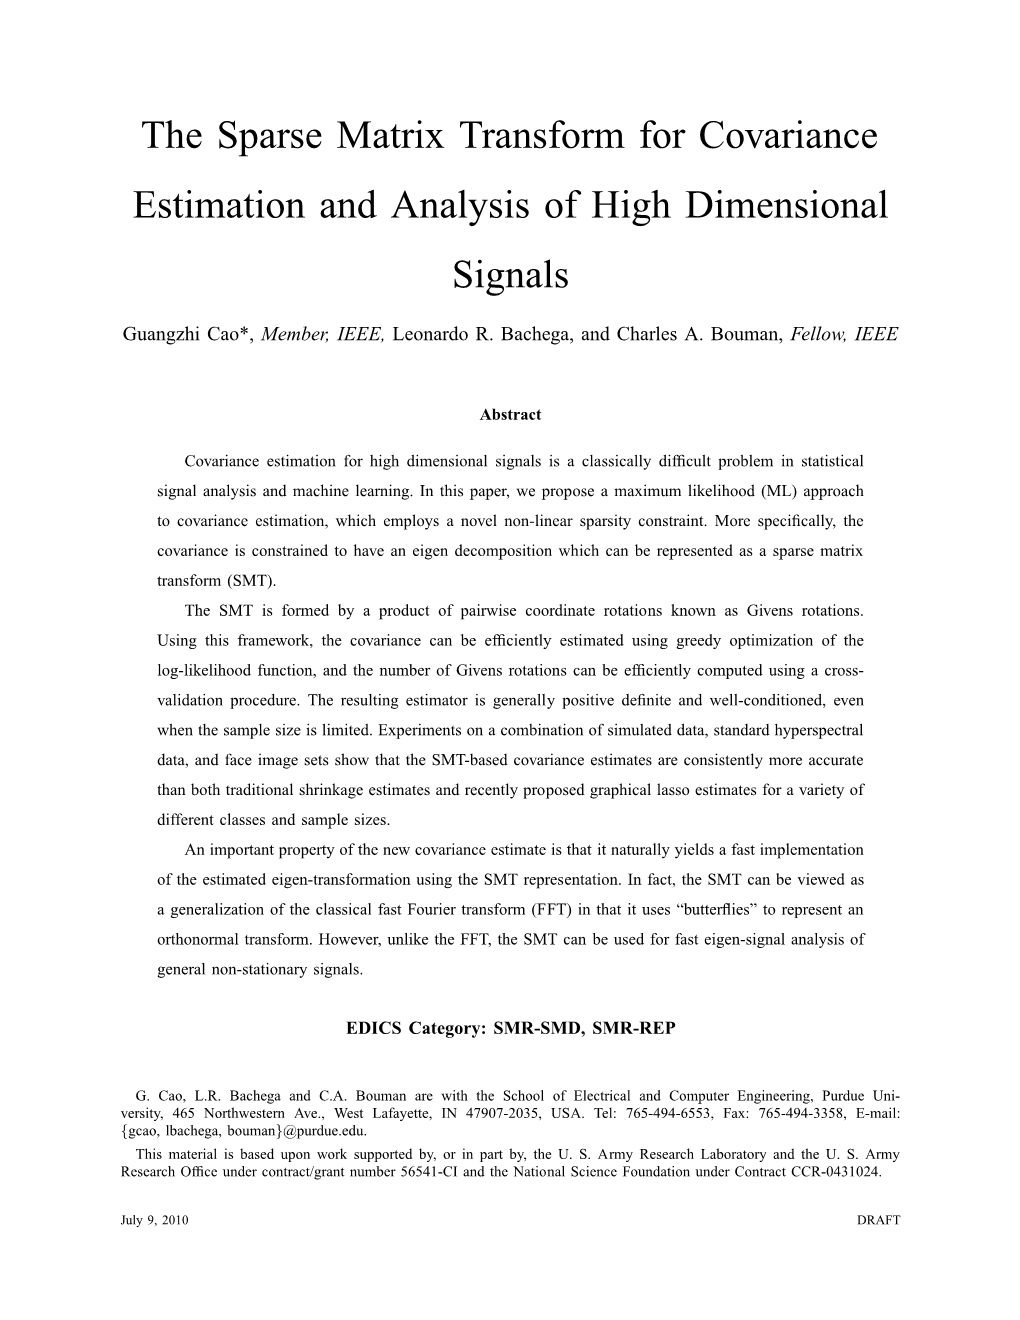 The Sparse Matrix Transform for Covariance Estimation and Analysis of High Dimensional Signals